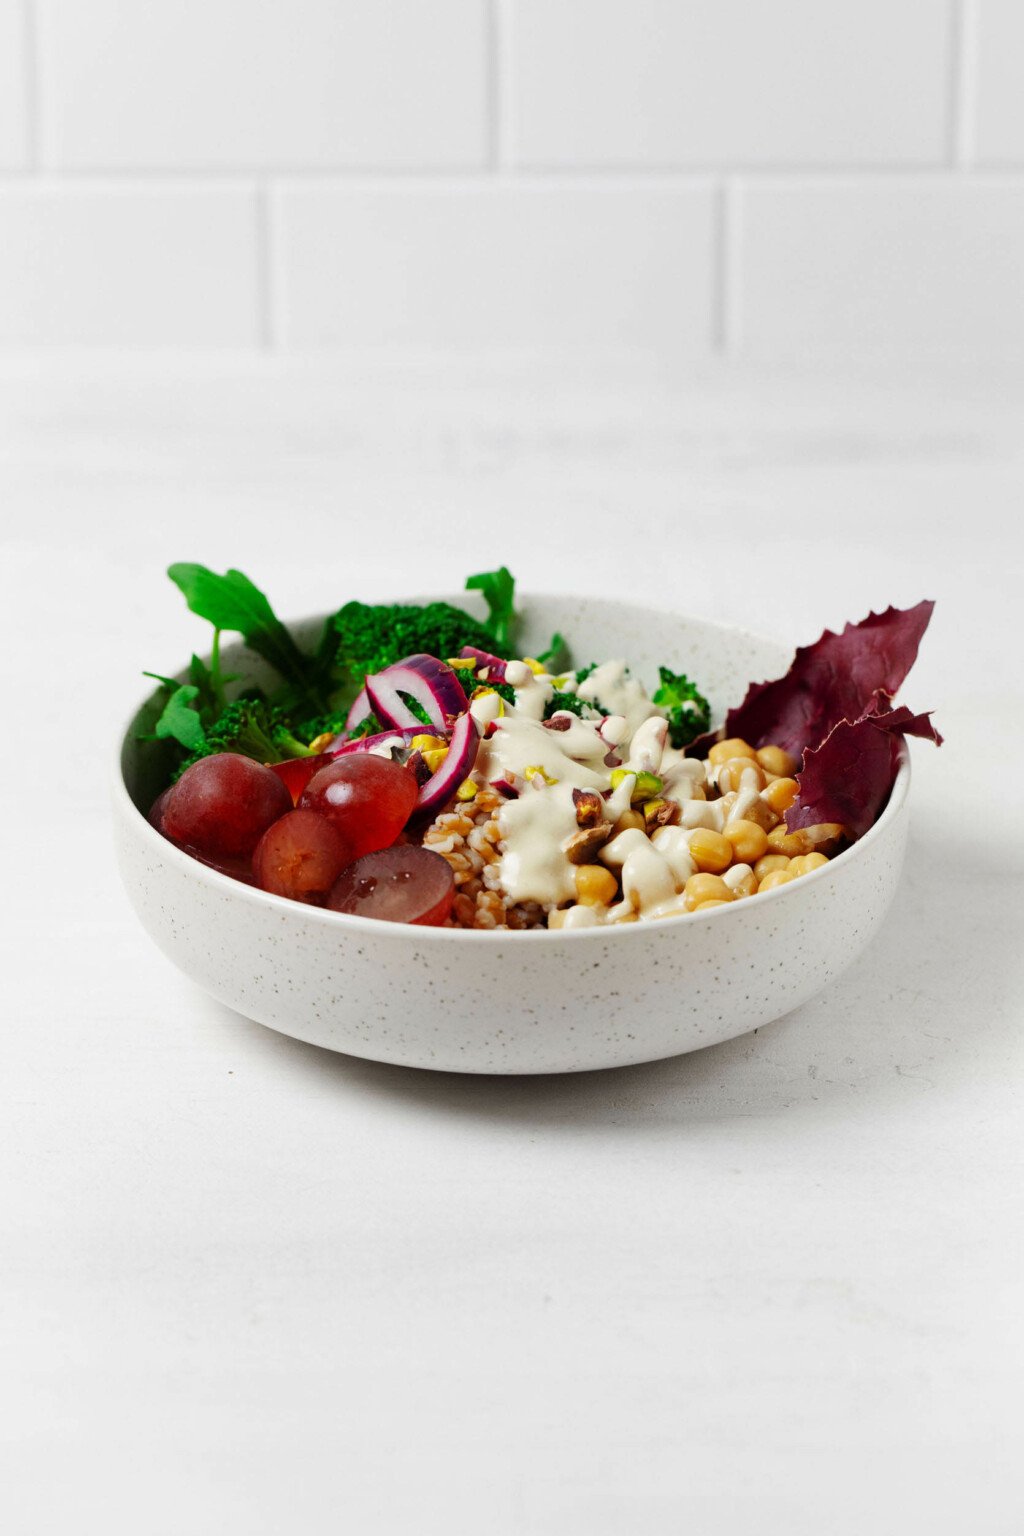 An angled photograph of a white bowl, filled with farro and other plant based ingredients, resting against a white background.